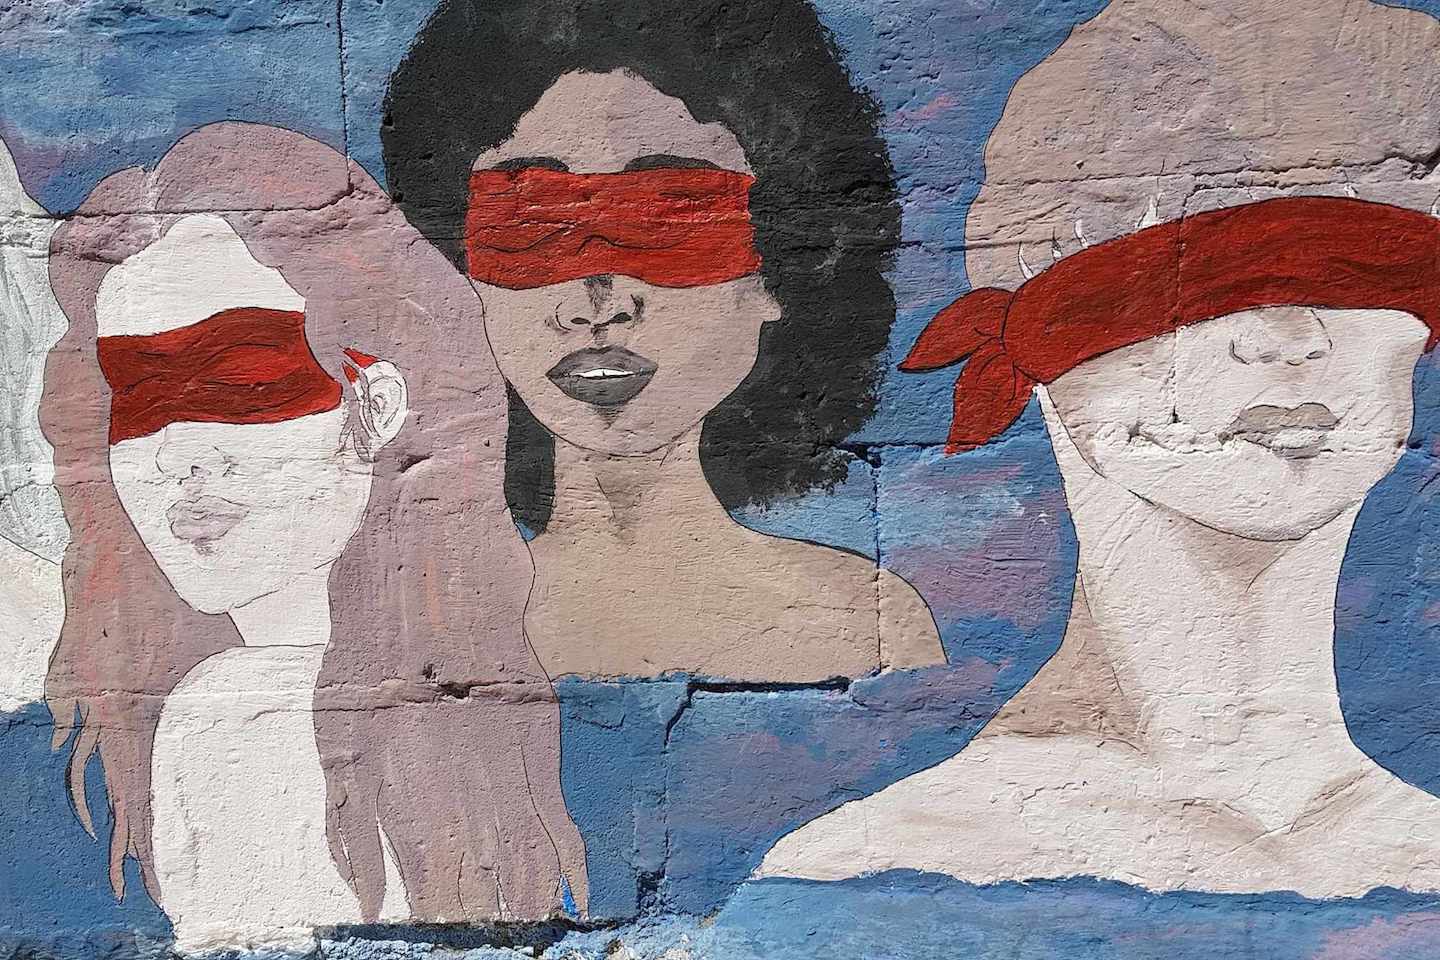 An image of a painting on a wall. The painting depicts three people, seen from the neck up, their eyes covered with a red cloth. Photo by Vulvani – www.vulvani.com